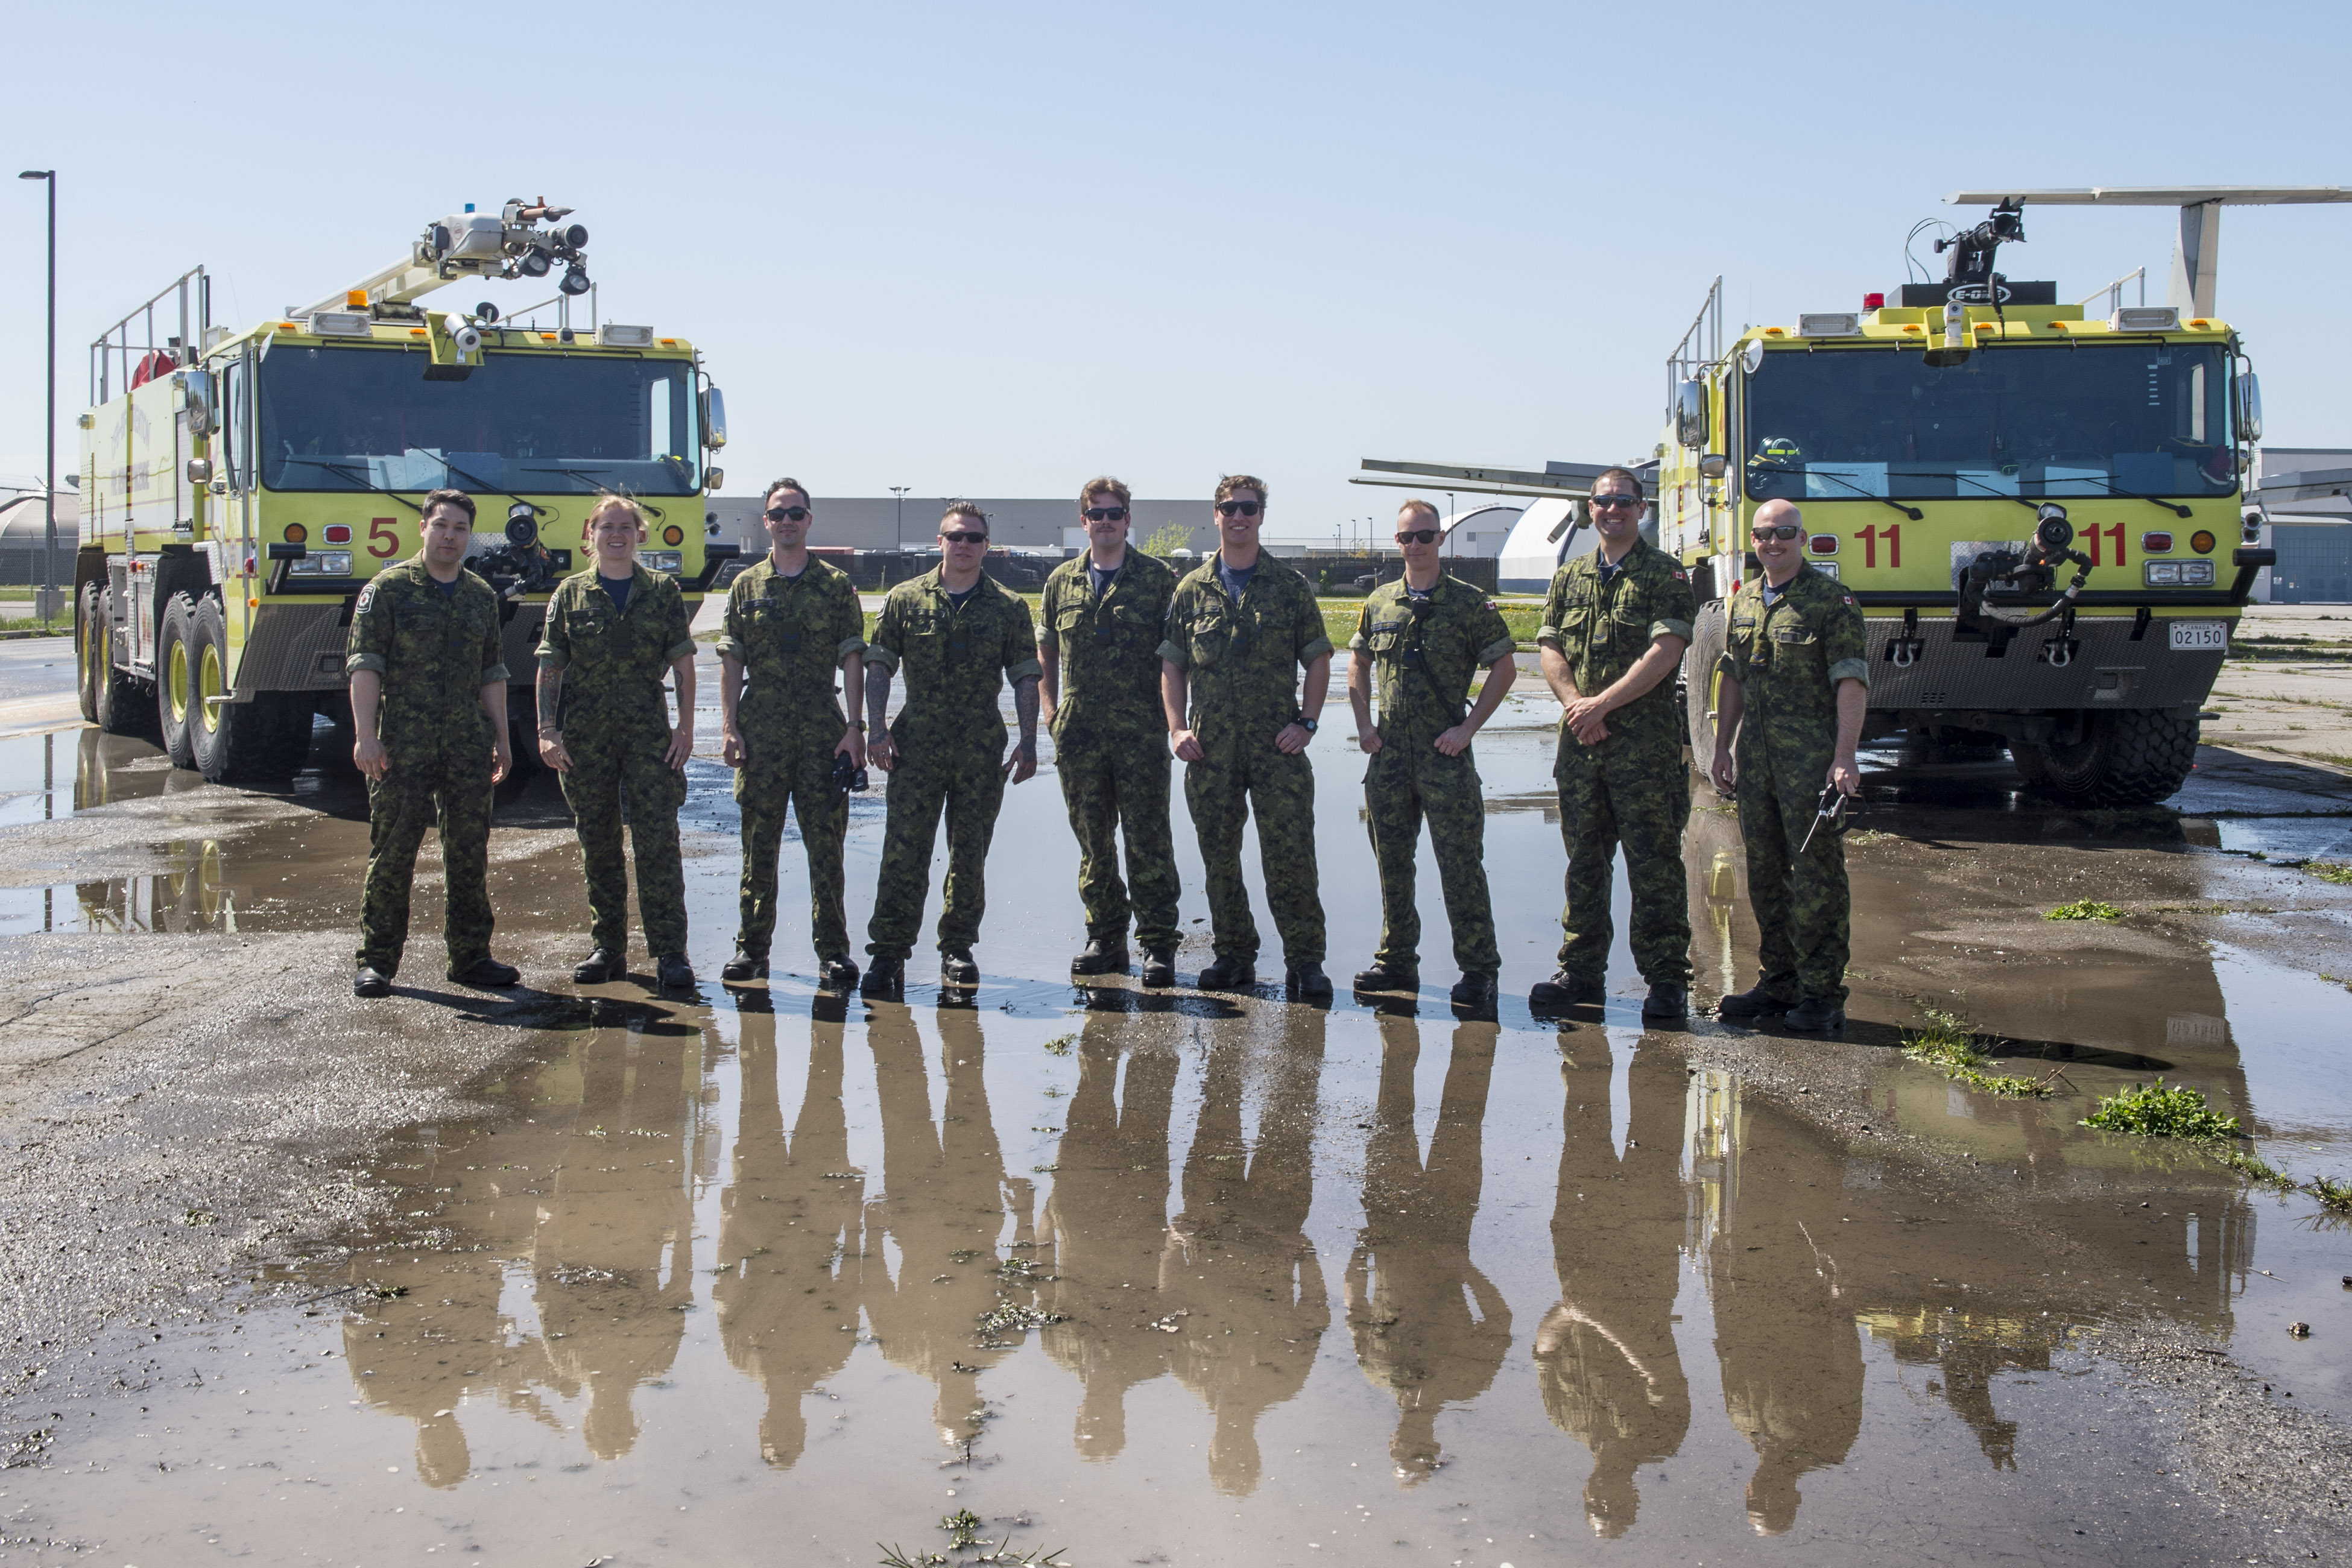 The firefighters of 85 Aircraft Rescue Firefighting fire hall at 8 Wing in Trenton, Ontario. 
From left to right: Aviator Taylor Bergen, Aviator Teresa Dalton, Corporal Grant Finnigan, Corporal Samual Norton, Aviator Andrew Scott, Corporal Chase Duke, Sergeant Jonathan Boudreau, Corporal Byron Freiter, and Corporal Joshua Dwyer.